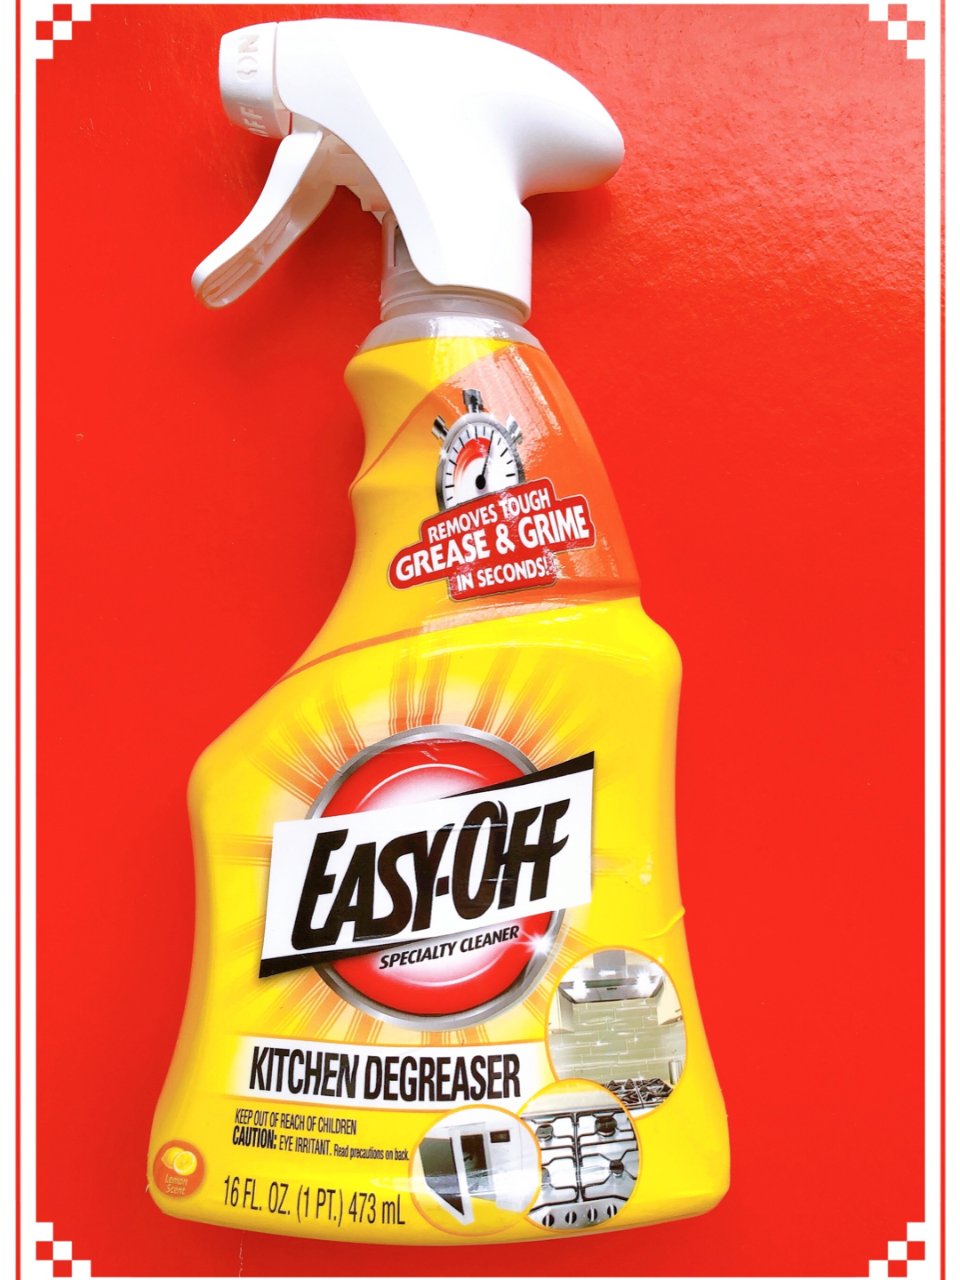 EASY-OFF,Walmart 沃尔玛,Easy-Off Specialty Kitchen Degreaser Cle,Amazon.com: Easy-Off Specialty Kitchen D